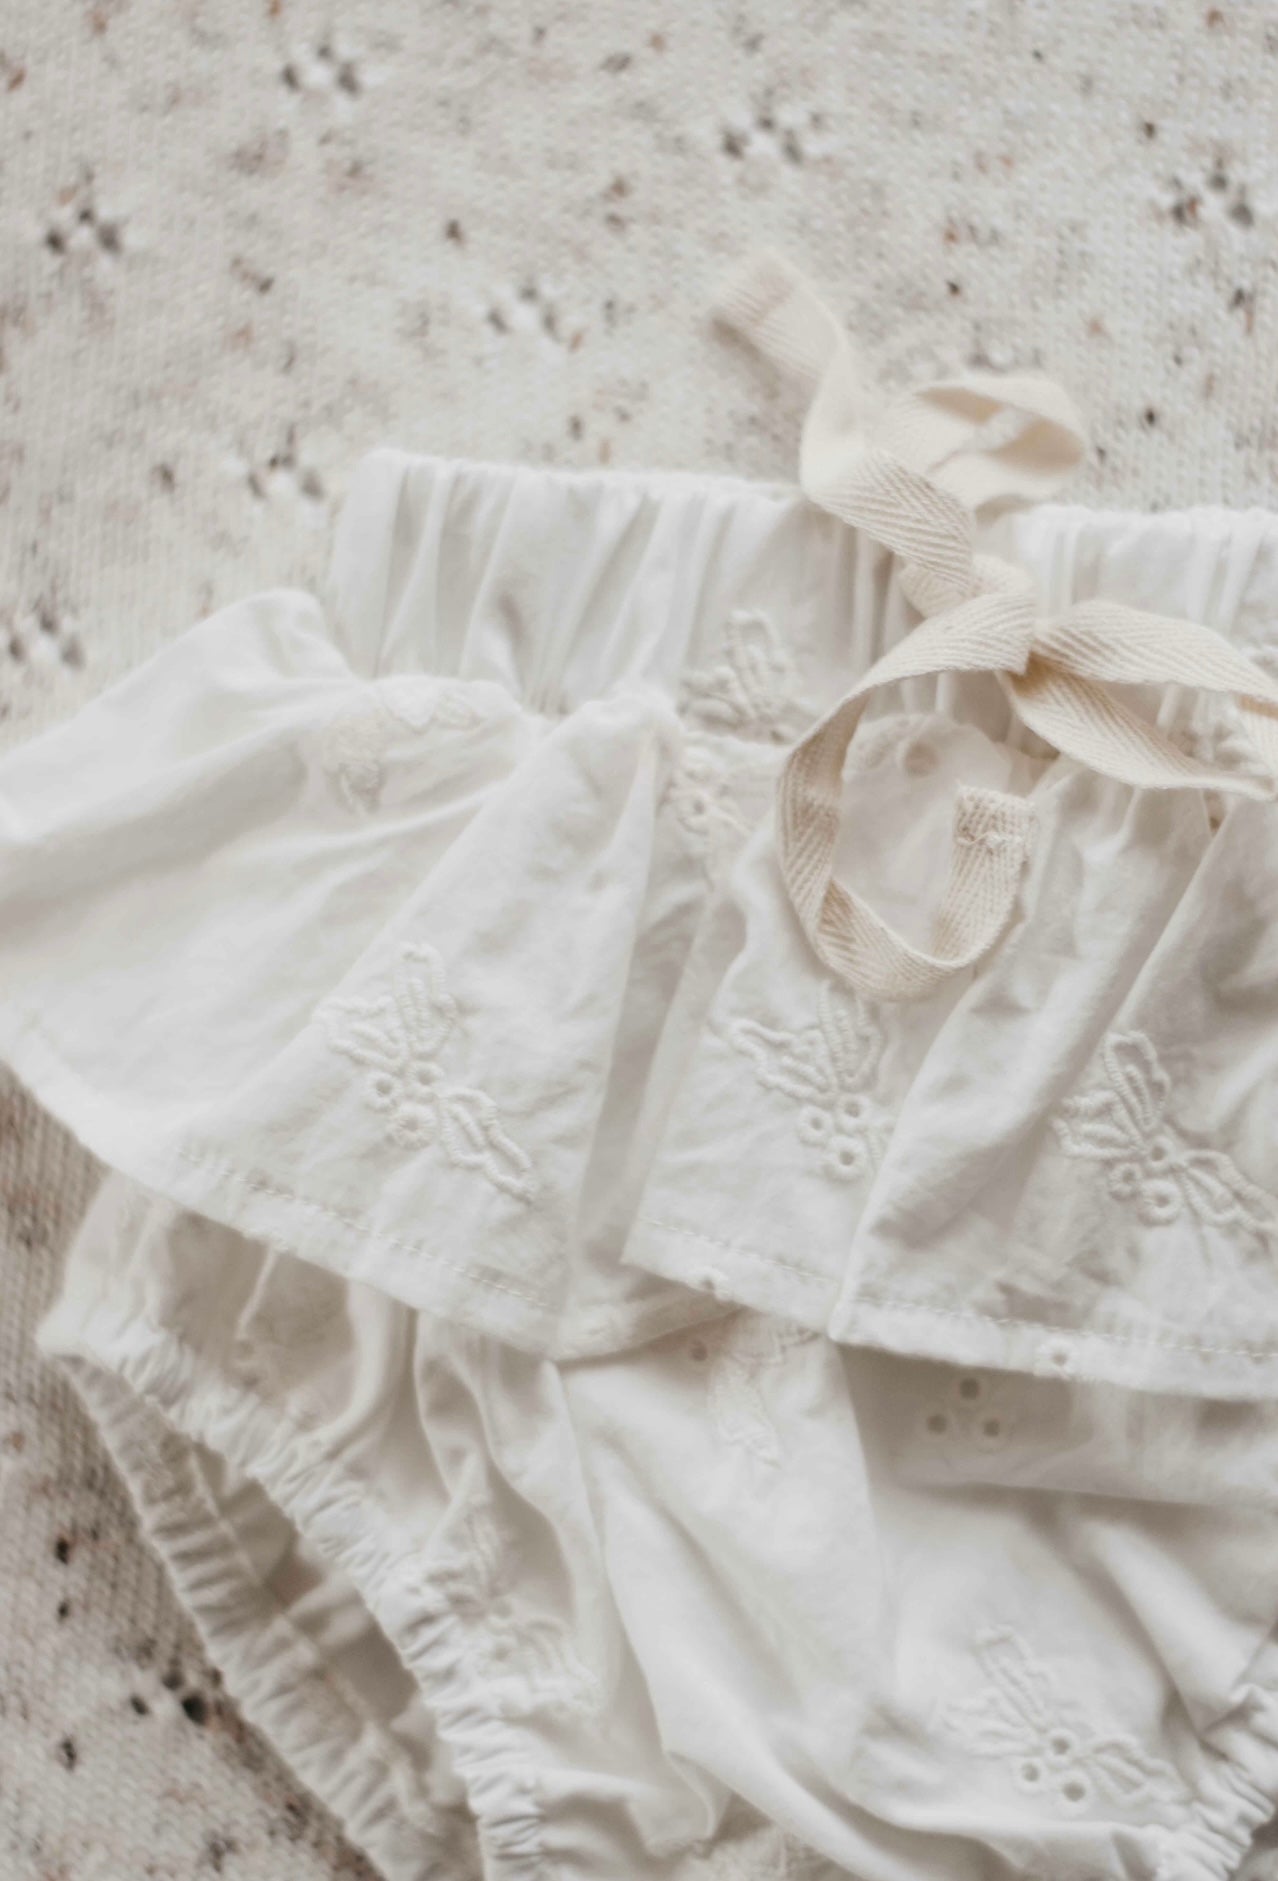 Bencer&Hazelnut Holly Bloomers White - PREORDER